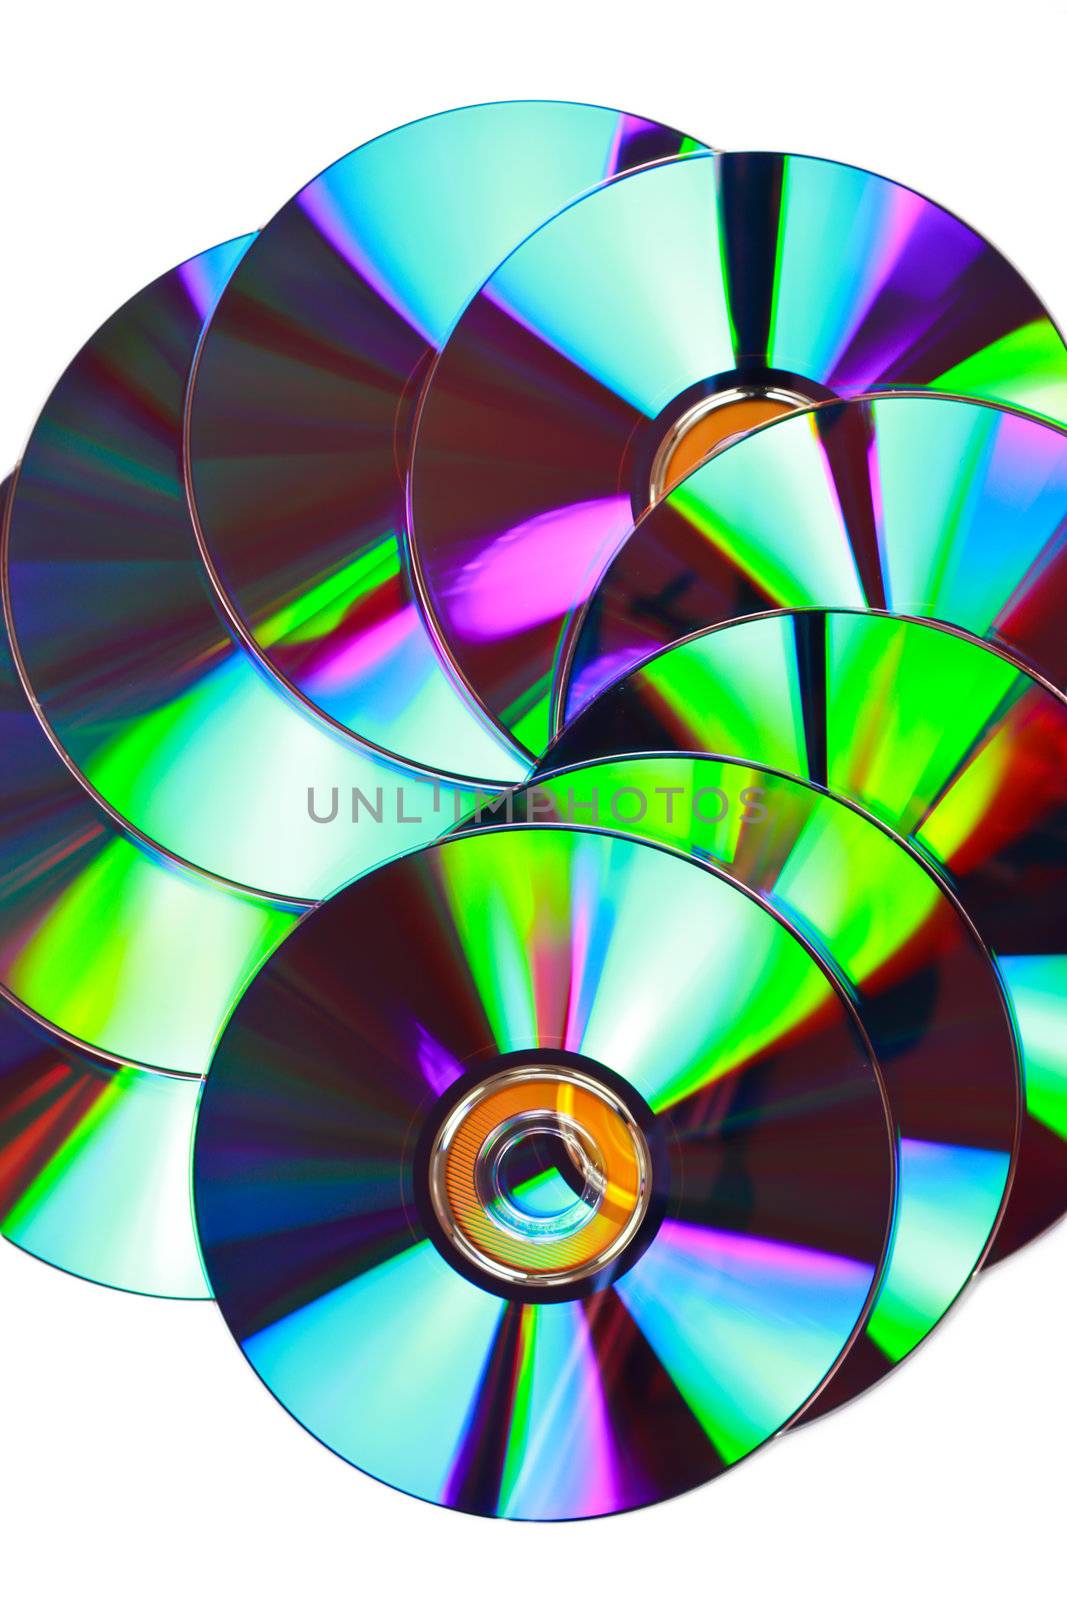 closes – up CD texture in white background